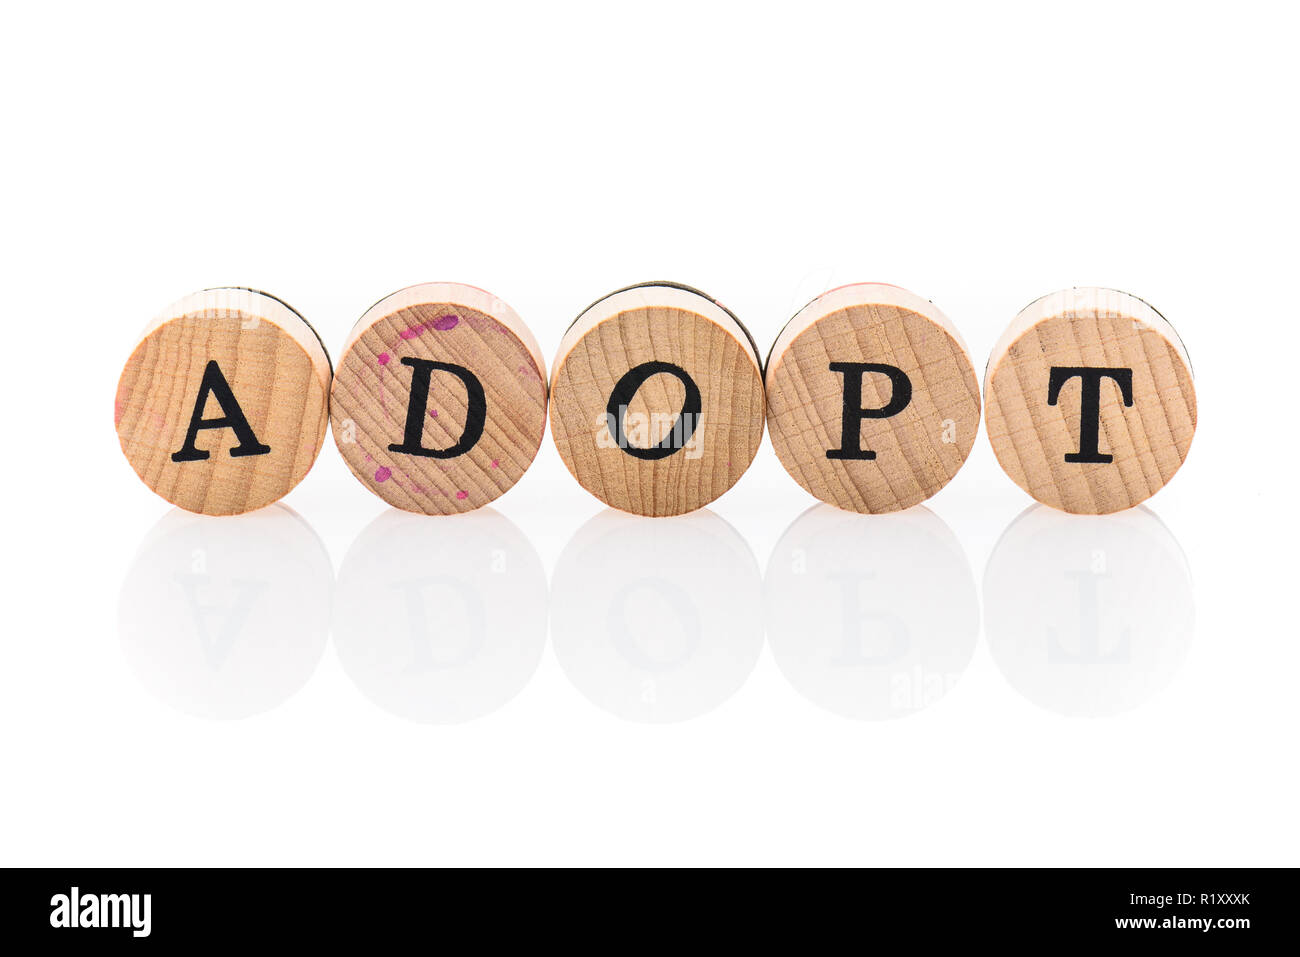 Word Adopt from circular wooden tiles with letters children toy. Concept of adoption spelled in children toy letters. Stock Photo